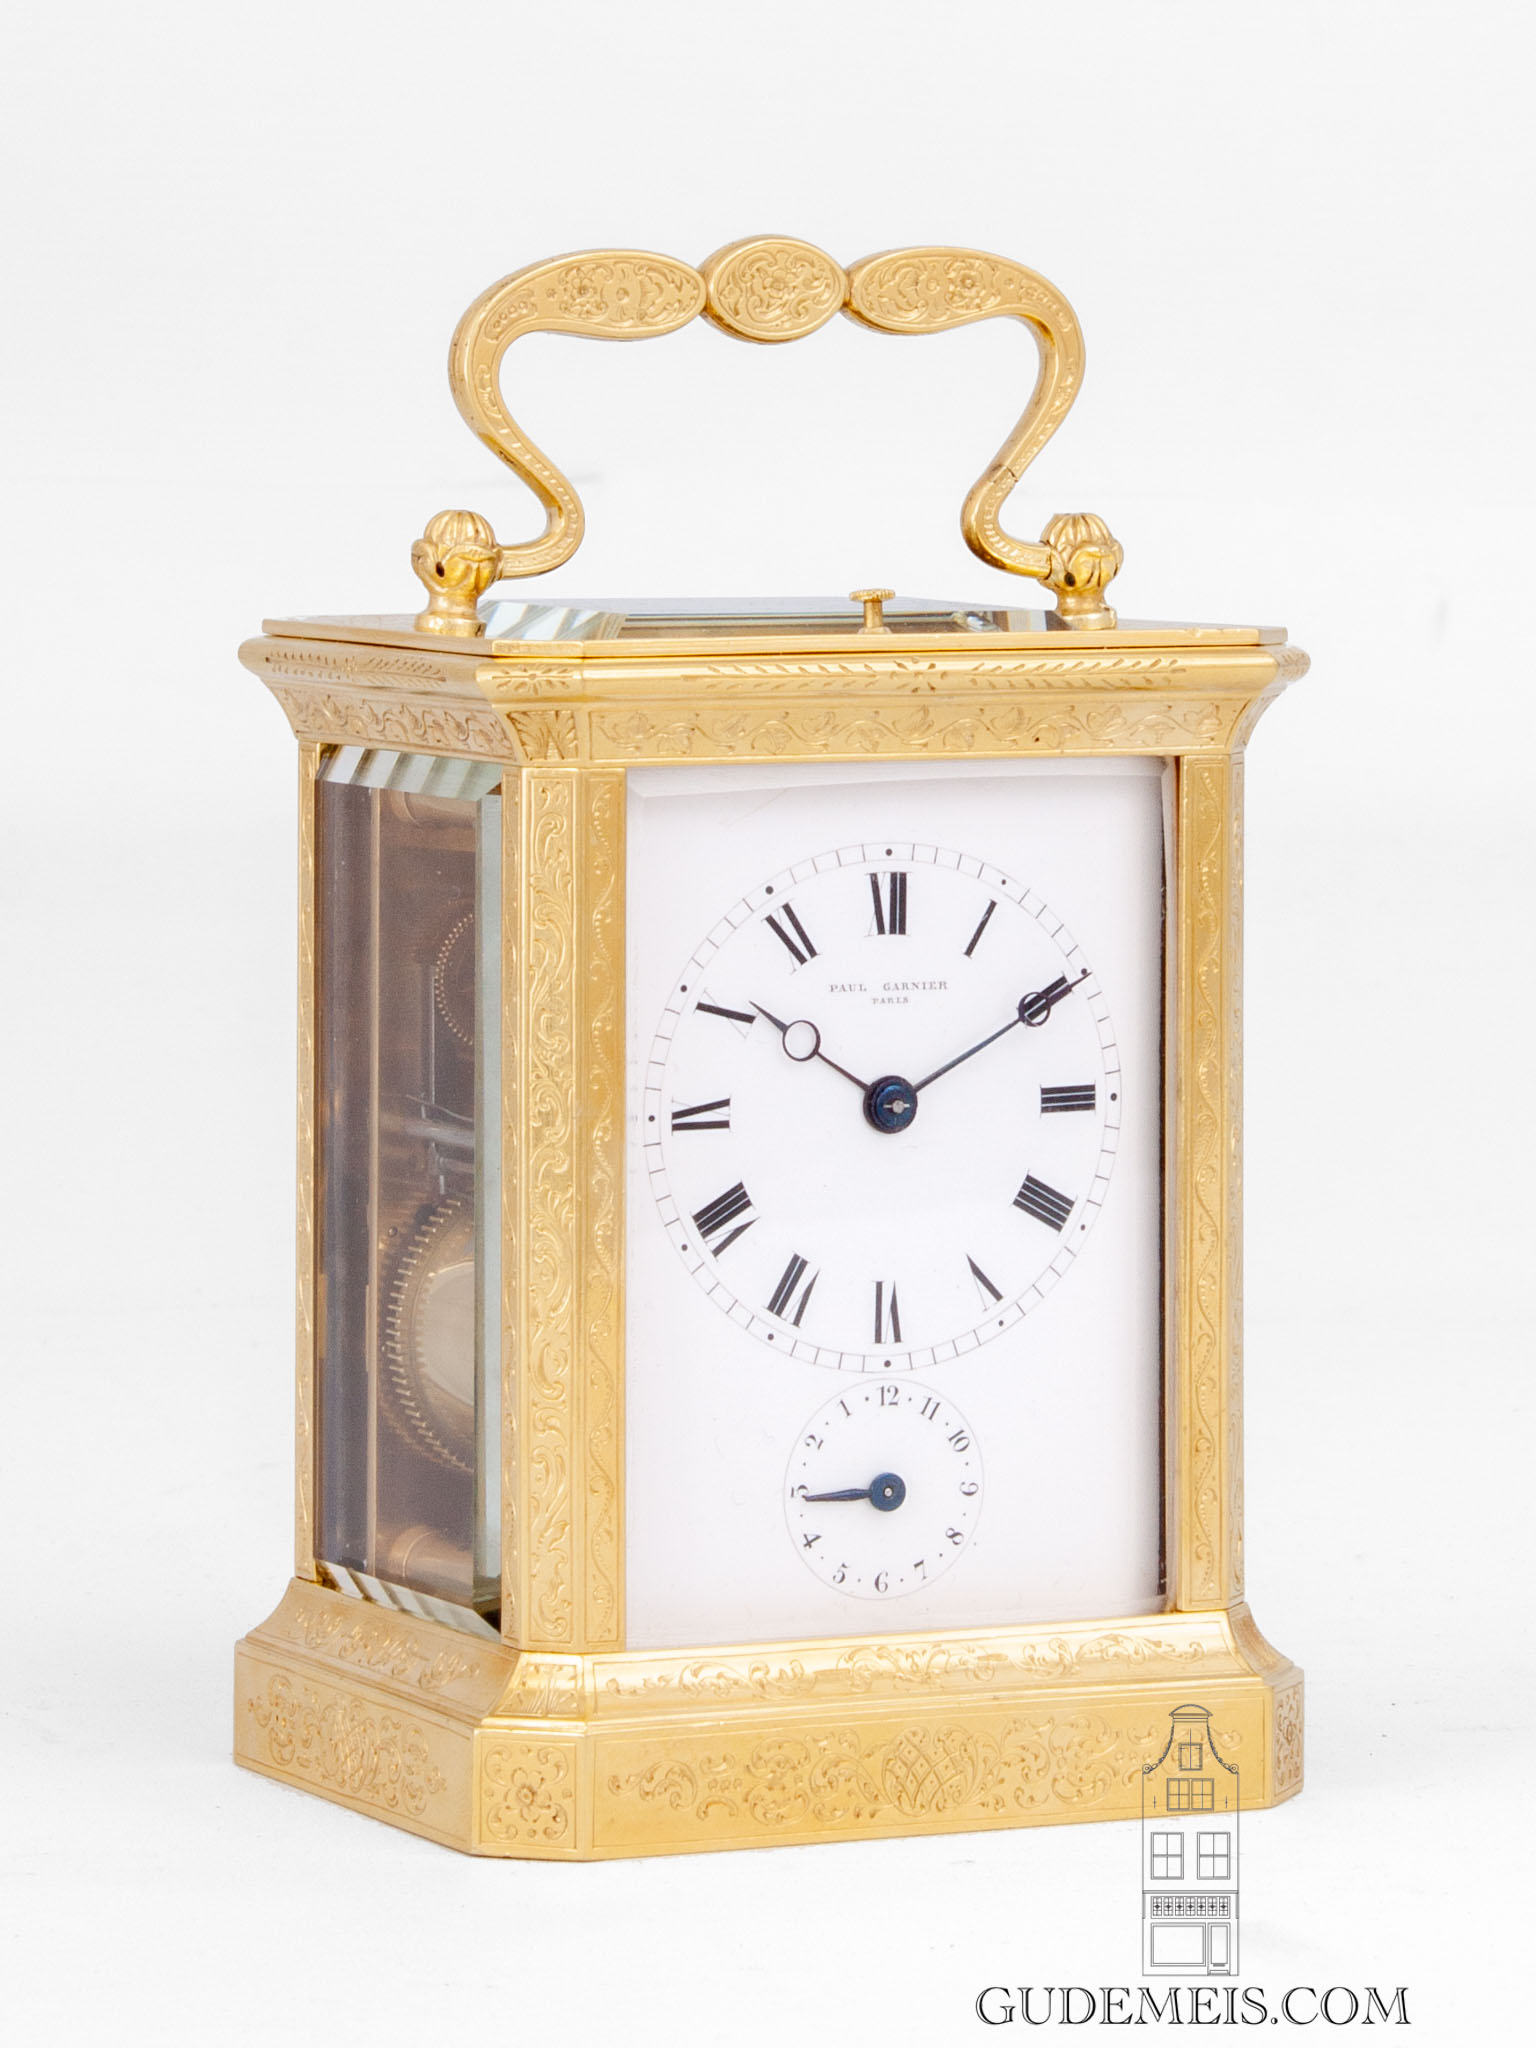 French-engraved-gilt-brass-striking-repeating-alarm-antique-carriage-travel-clock-Paul-Garnier-chaff-cutter-escapement-